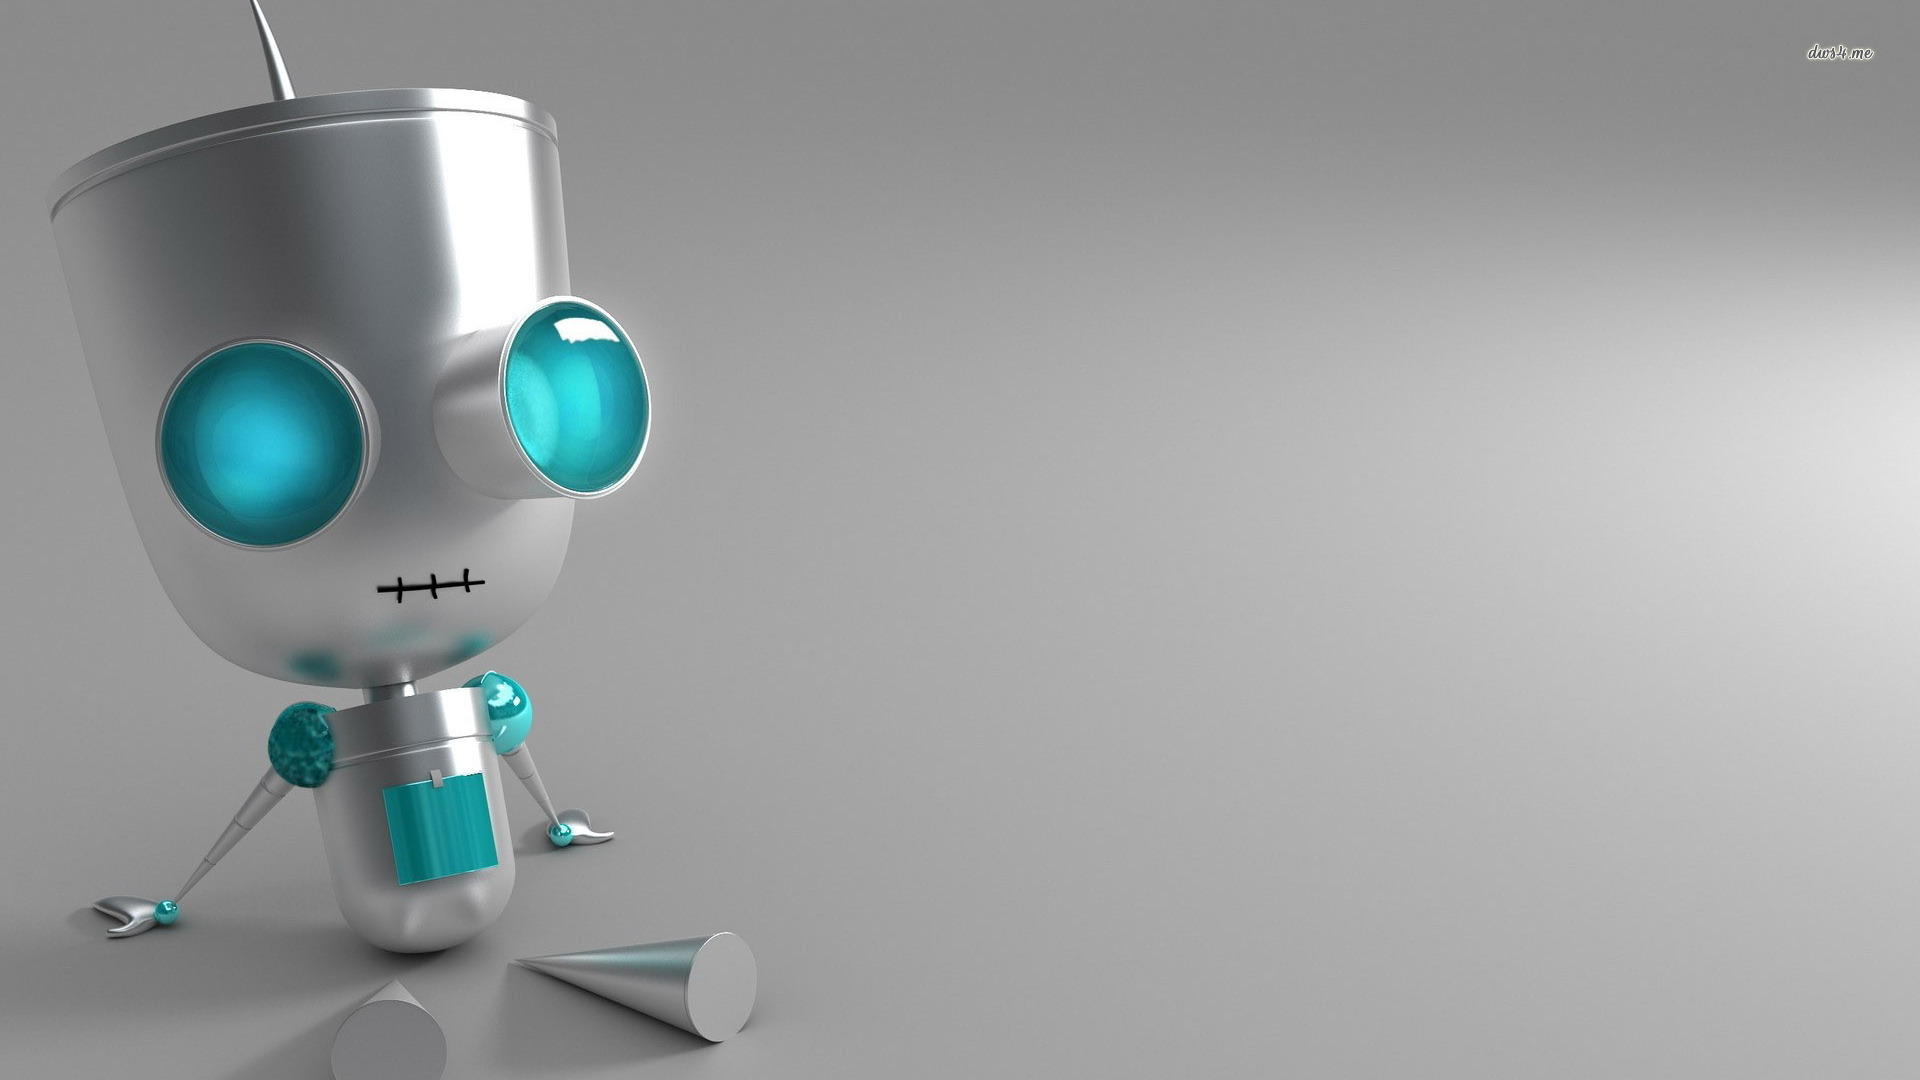 Awesome HD Robot Wallpaper Background For